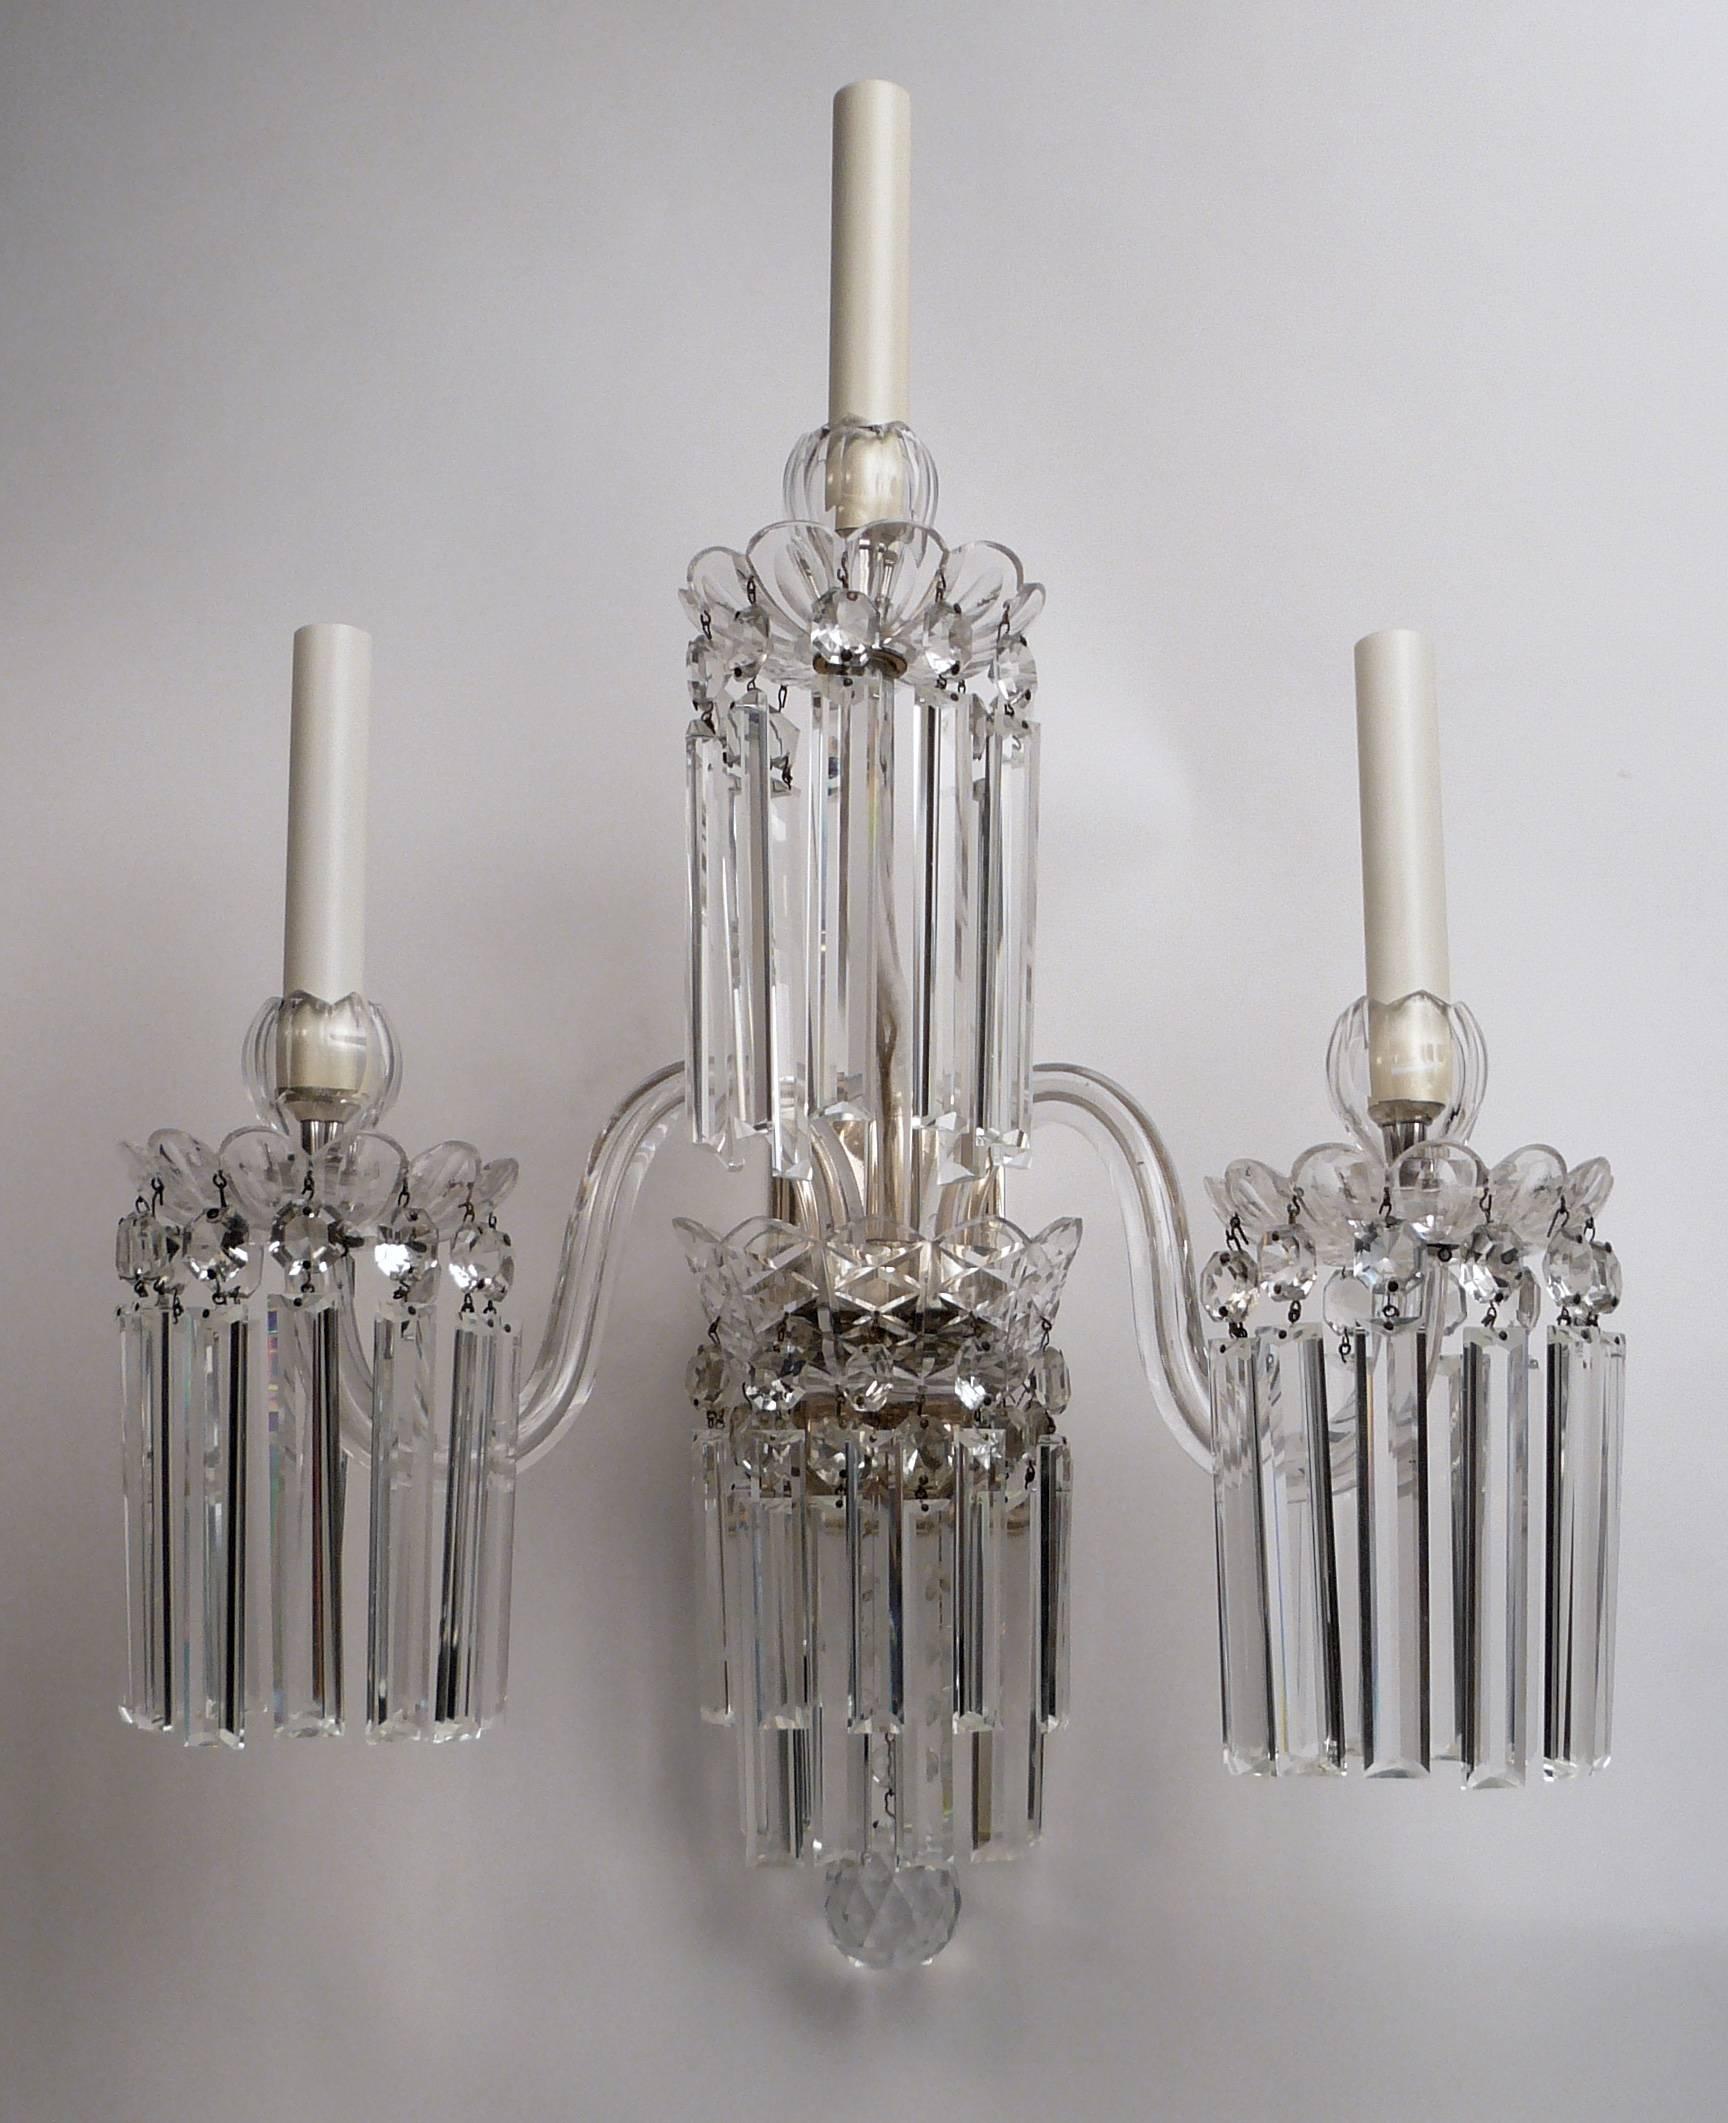 Originally gas powered, these impressive sconces feature finely cut crystal 'Osler' bobeches, rule cut prismatic drops, and silver plated fittings. Newly rewired, these sconces are ready for use.

      